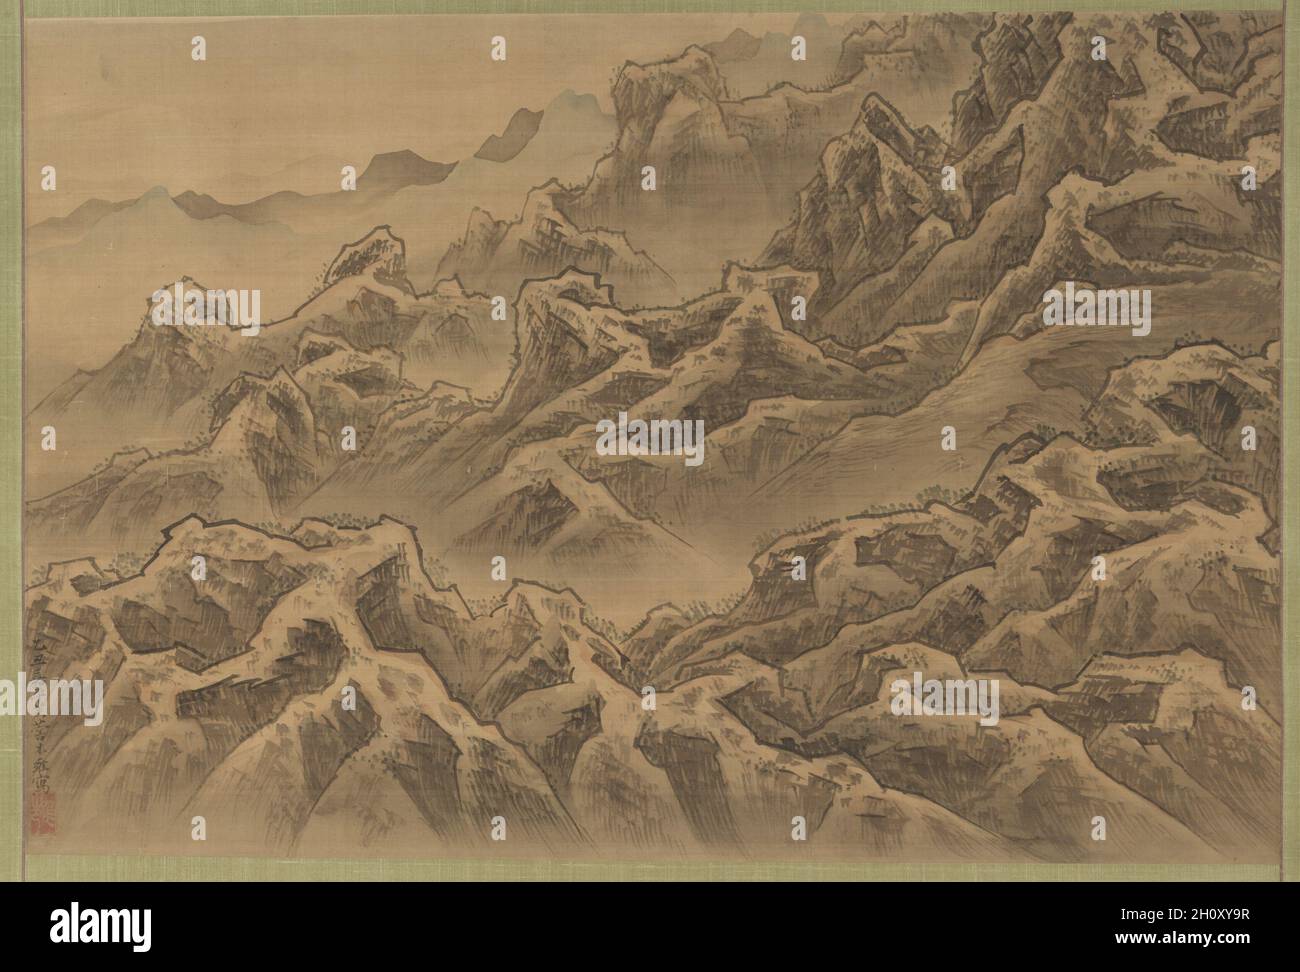 Mountains and Ravine, 1805. Suzuki Fuyō (Japanese, 1749-1816). Hanging scroll; ink and color on silk; painting only: 50 x 74 cm (19 11/16 x 29 1/8 in.); including mounting: 160 x 92.7 cm (63 x 36 1/2 in.). Stock Photo